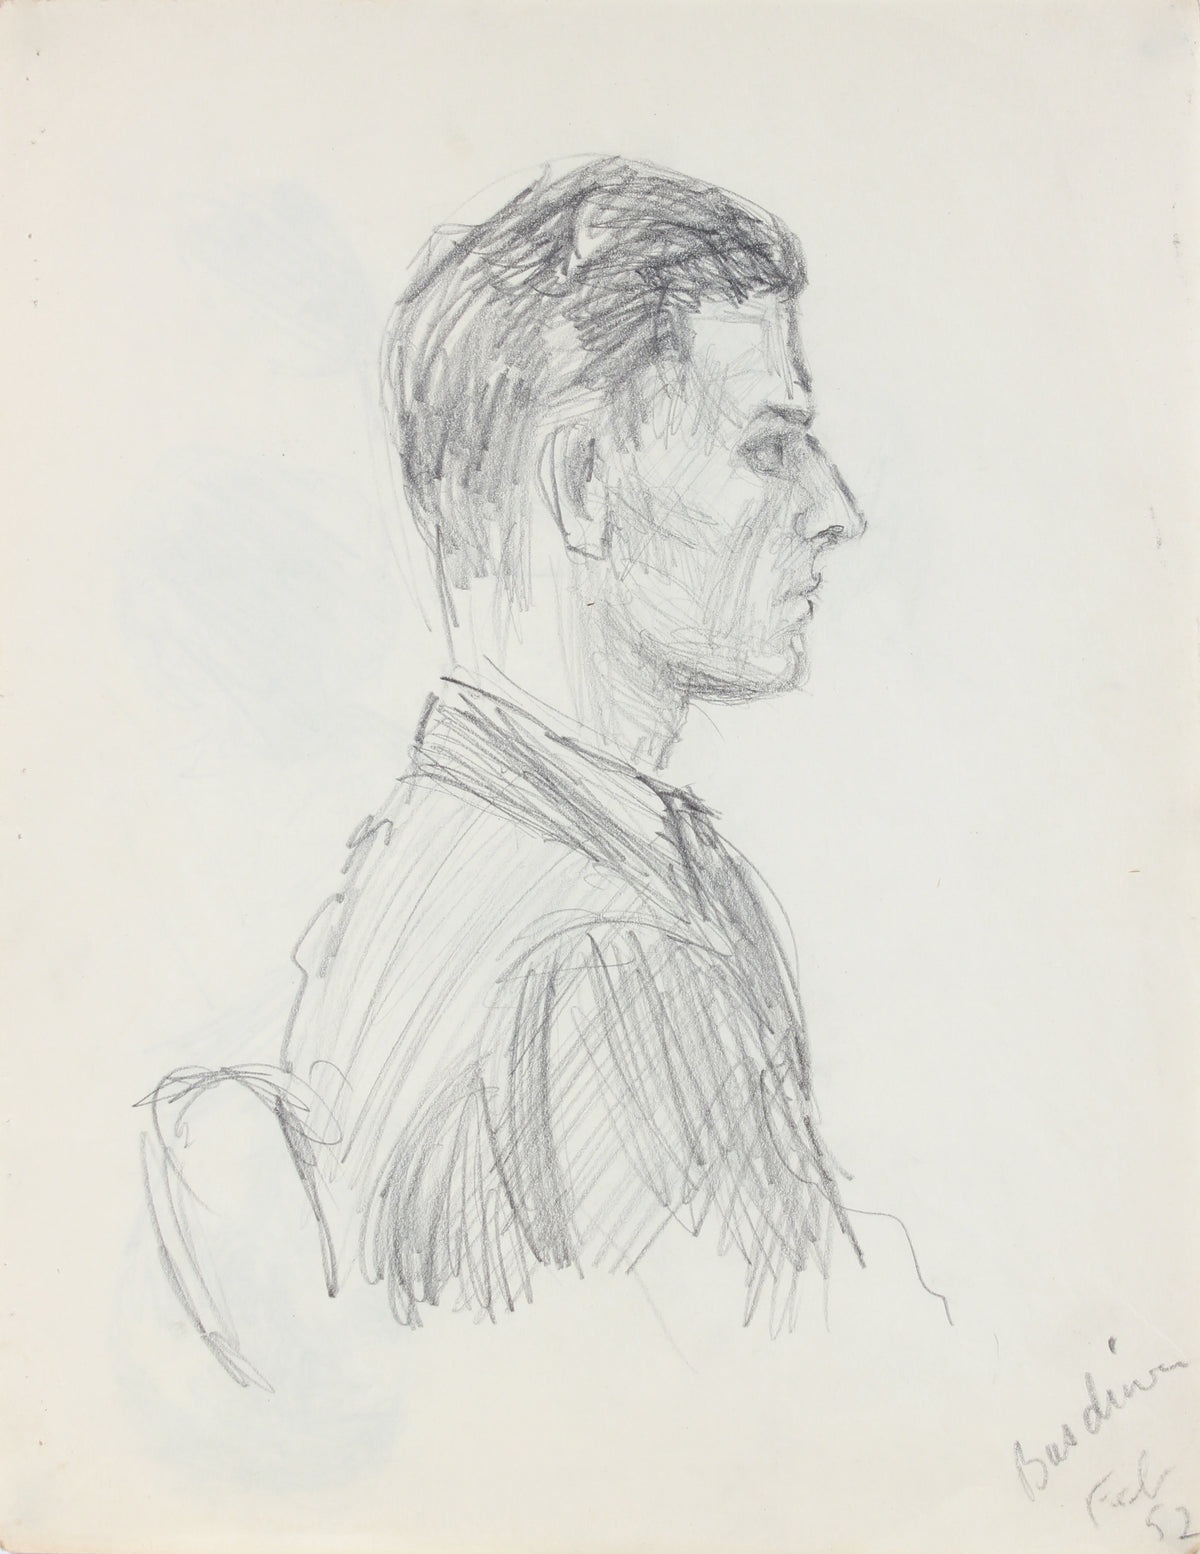 Seated Man in Profile &lt;br&gt;1940-50s Graphite &lt;br&gt;&lt;br&gt;#A8481